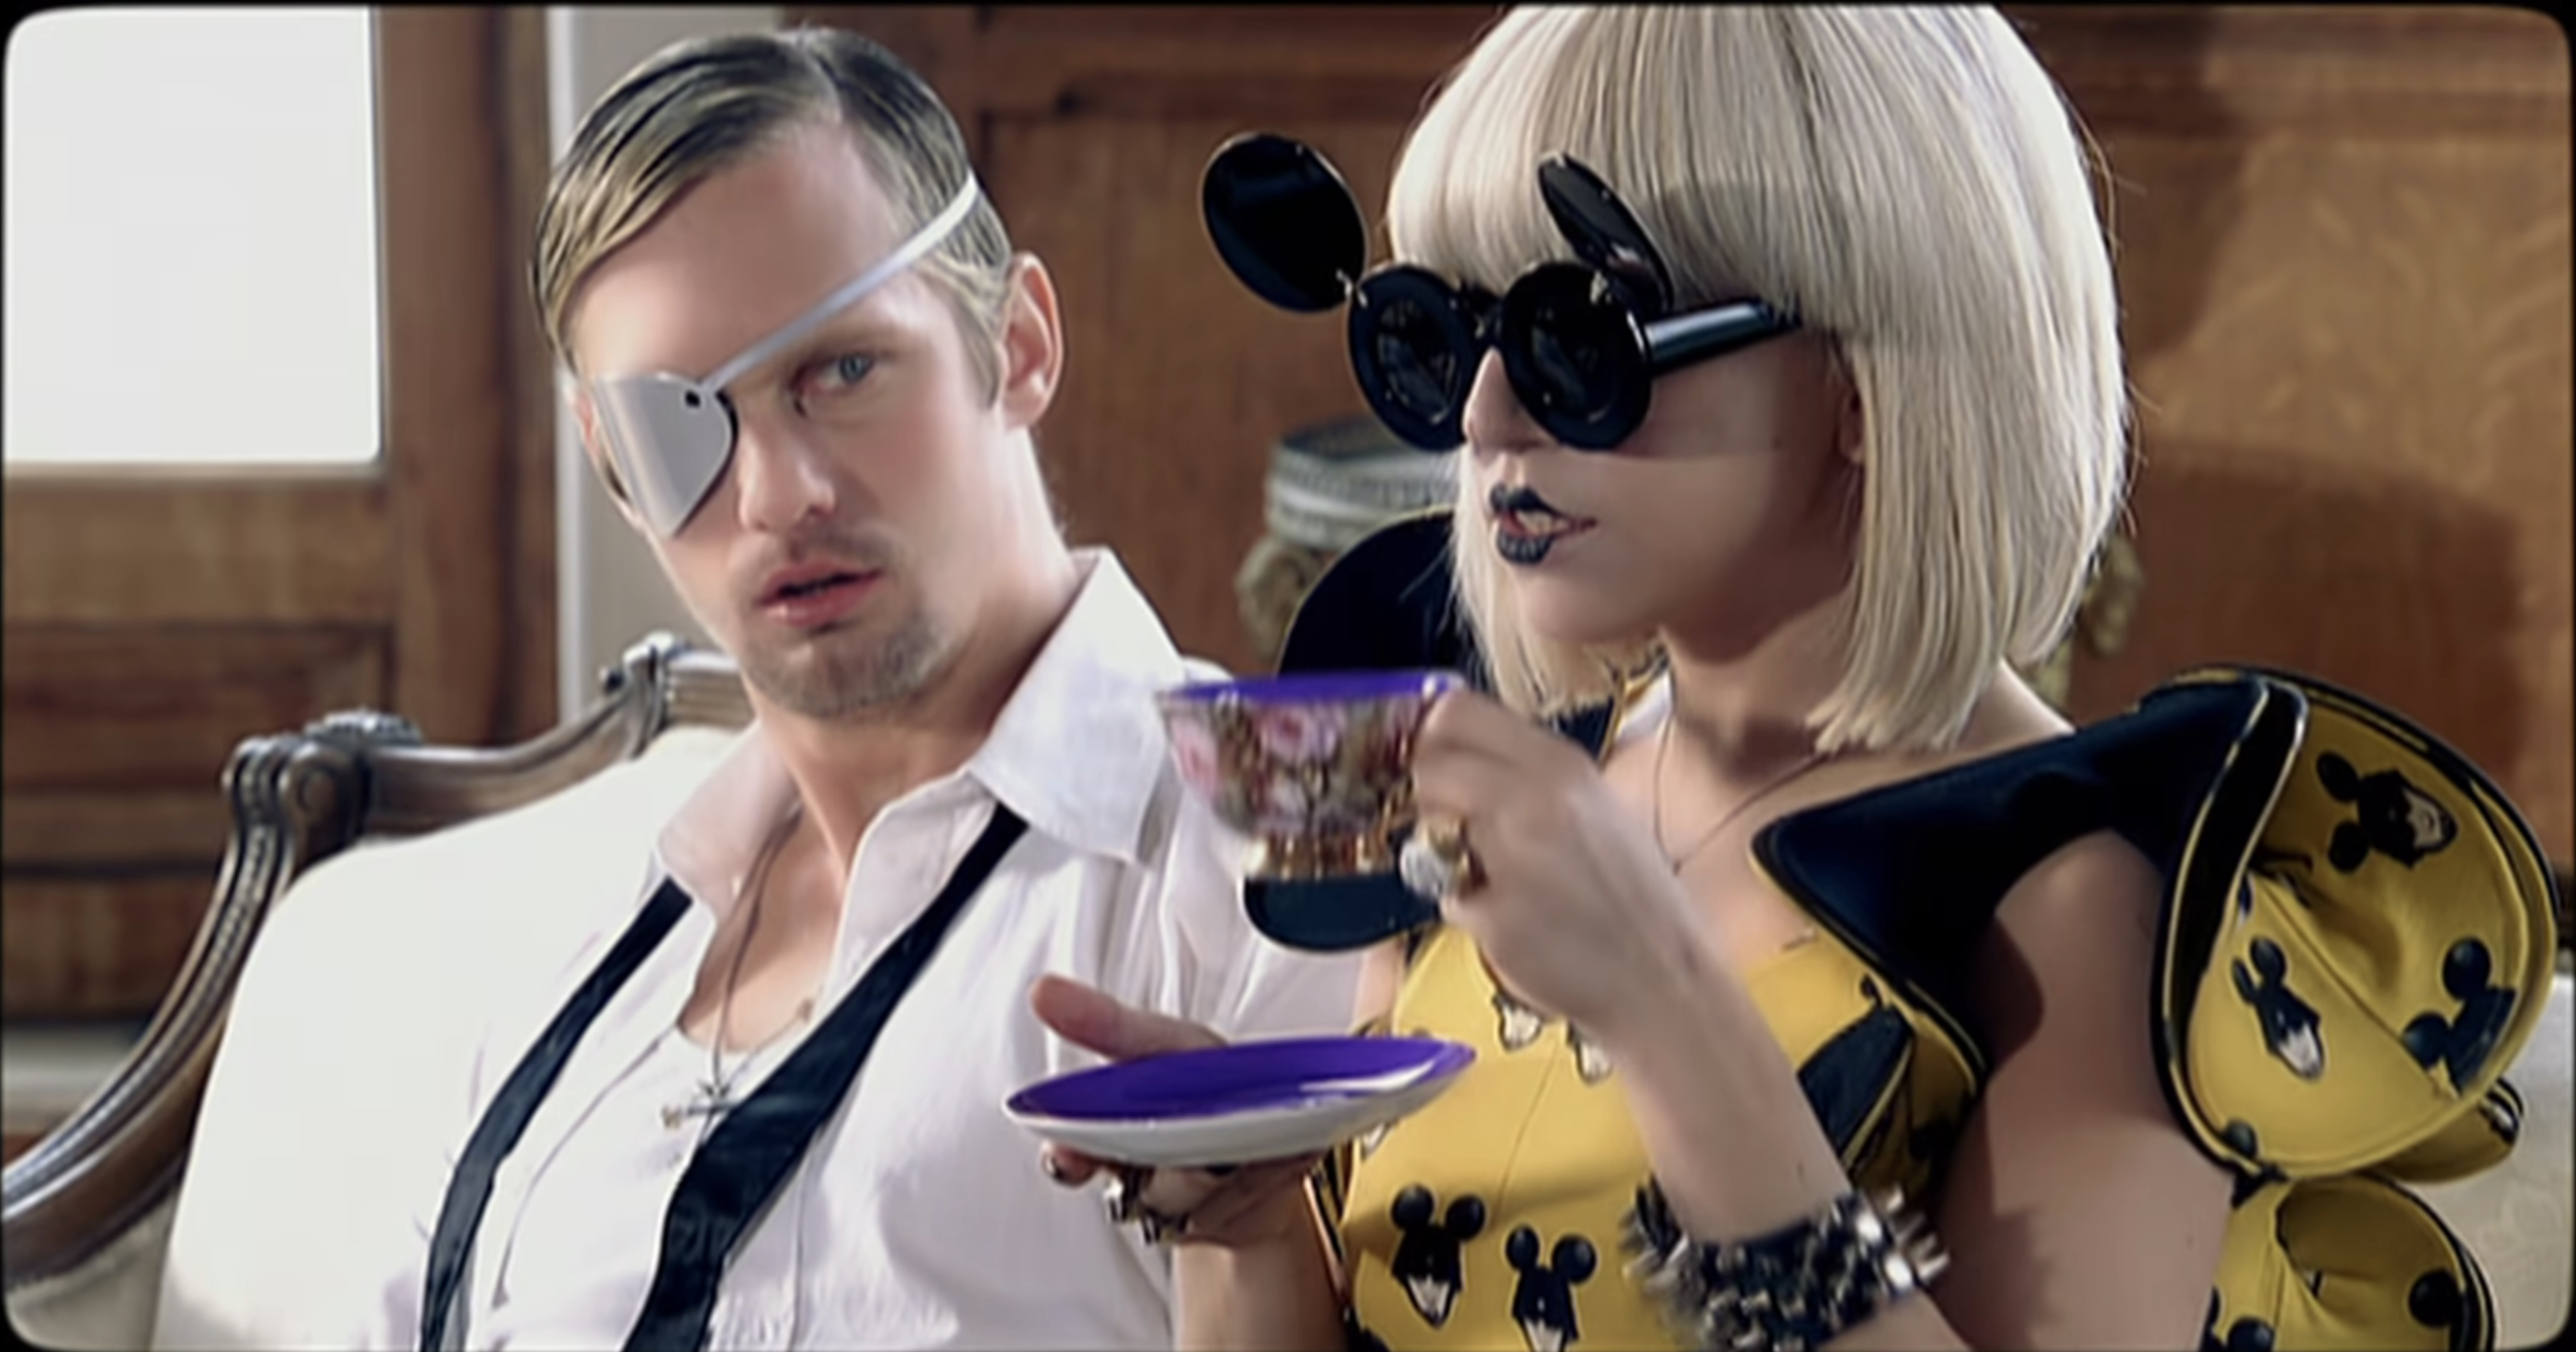 Lady Gaga sipping tea in her &quot;Paparazzi&quot; music video with Alexander Skarsgård sitting next to her